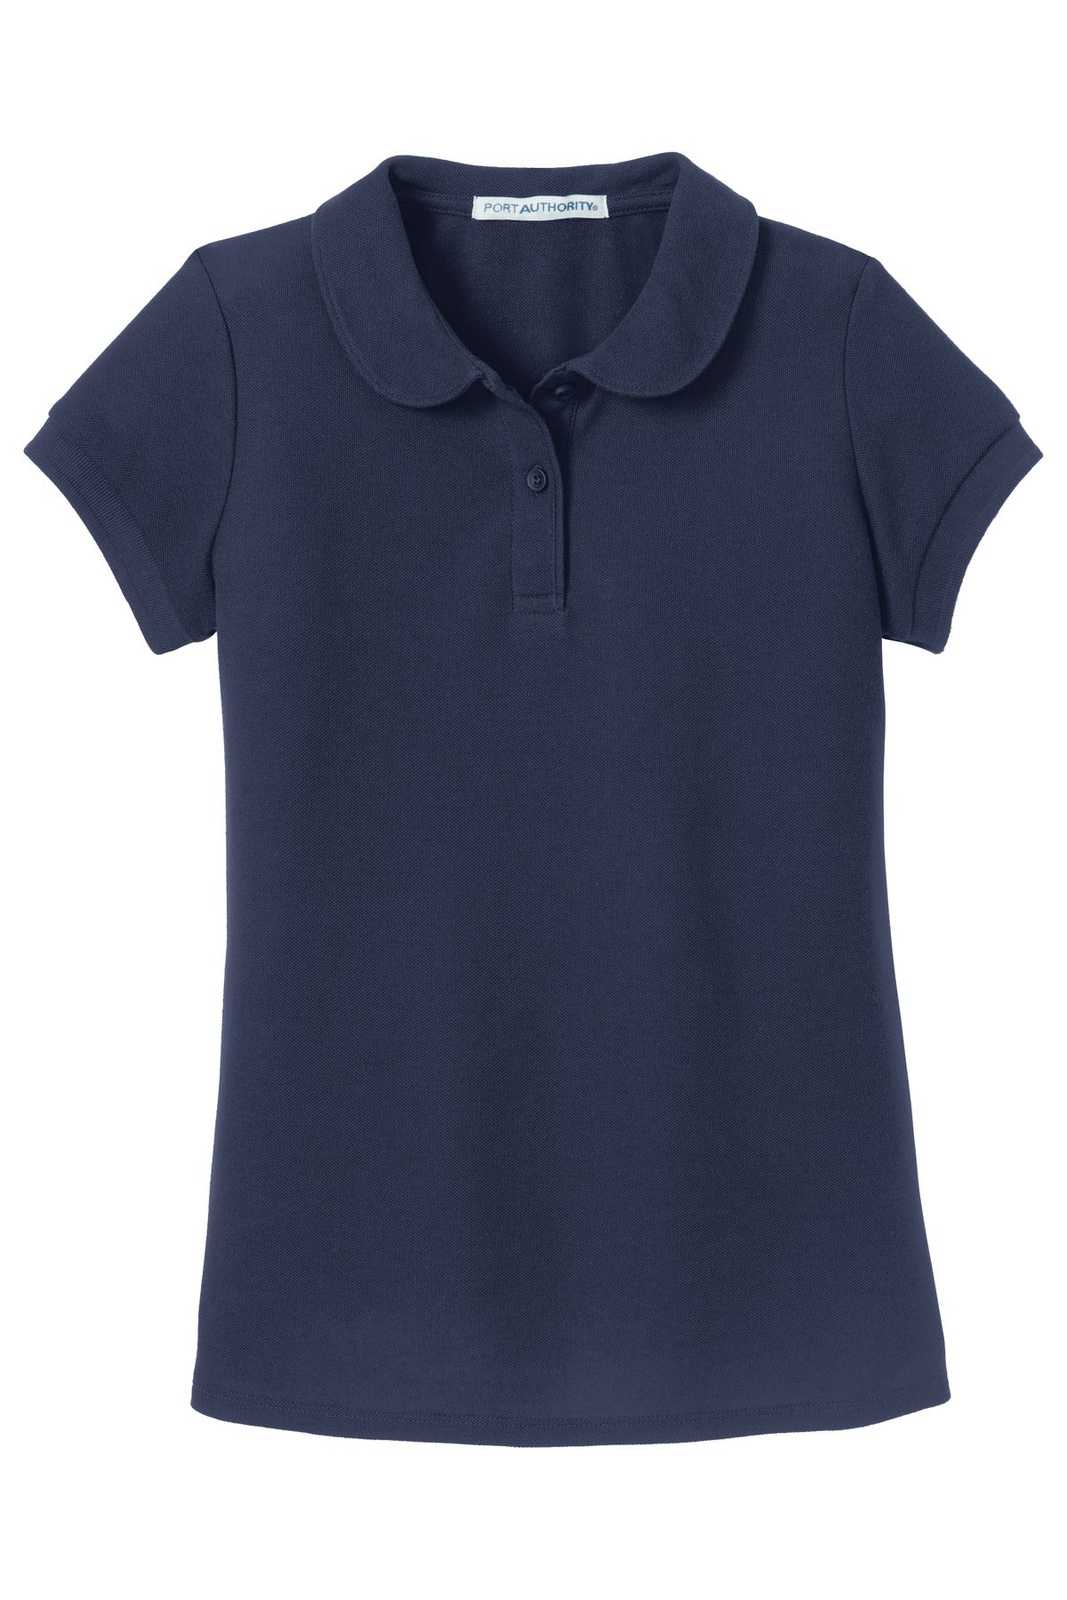 Port Authority YG503 Girls Silk Touch Peter Pan Collar Polo - Navy - HIT a Double - 5